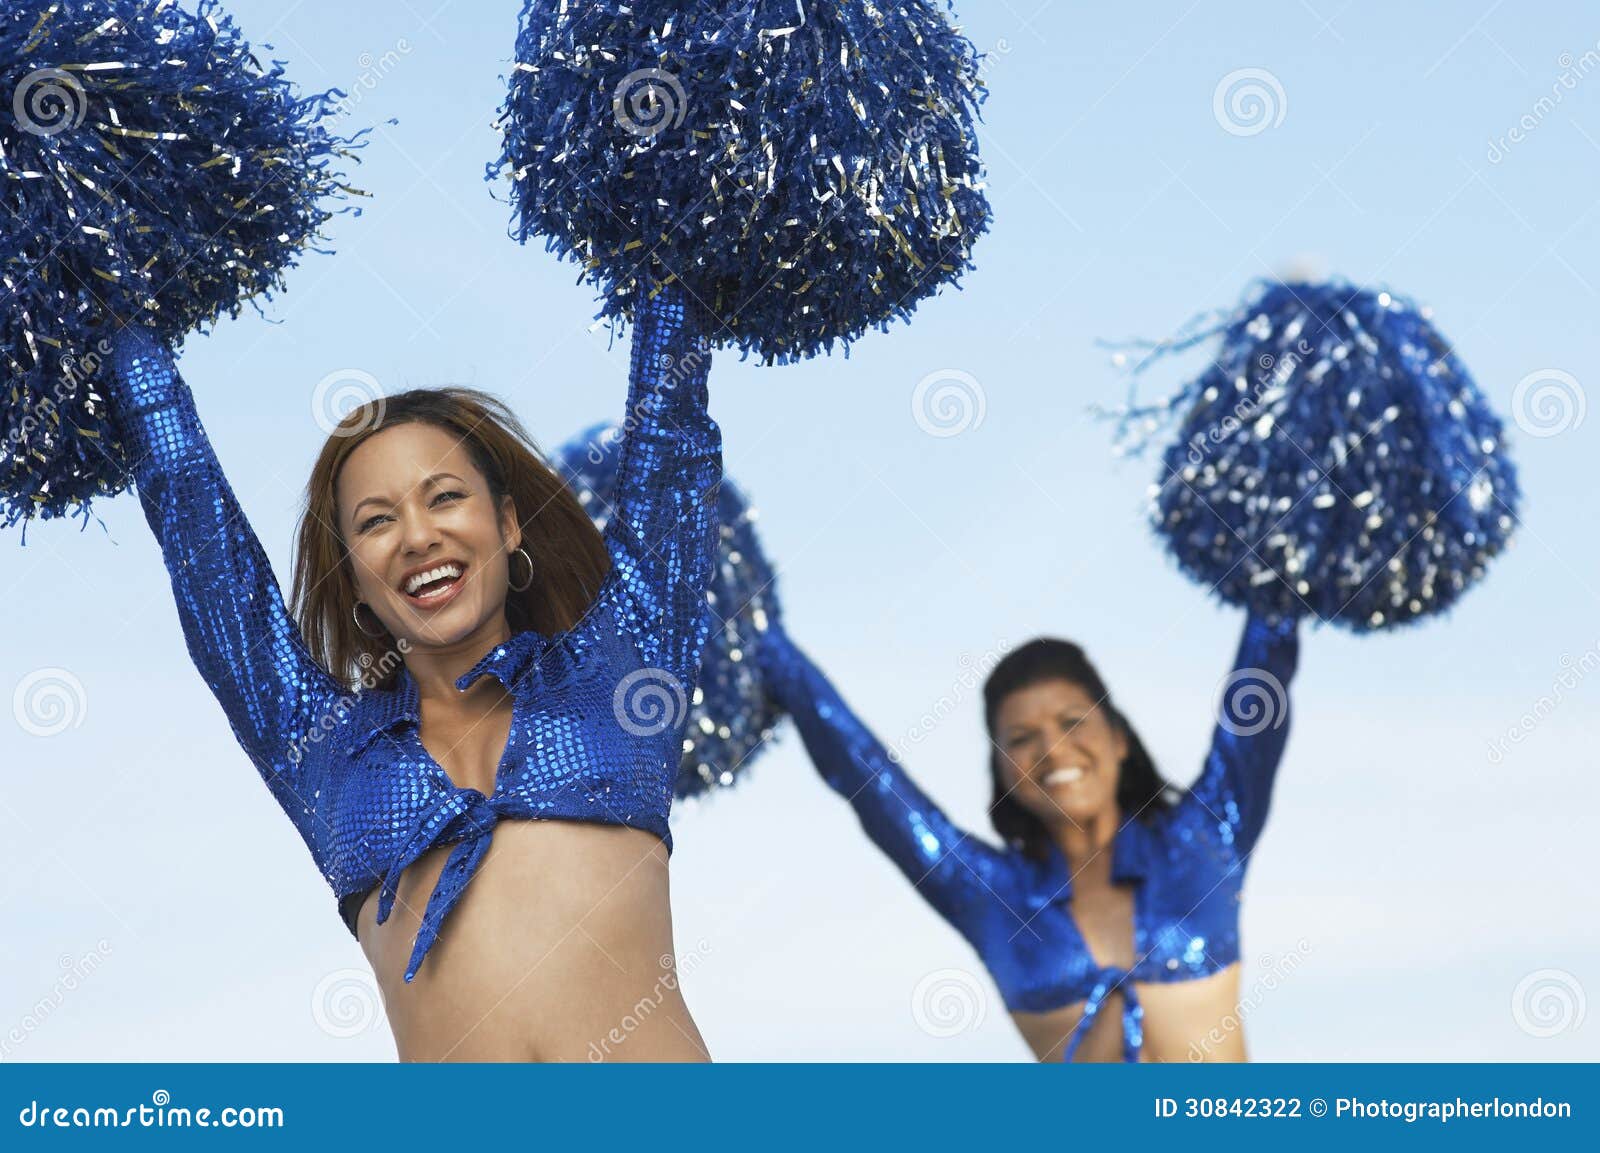 253 Cheerleaders Pom Poms Photos Free Royalty Free Stock Photos From Dreamstime